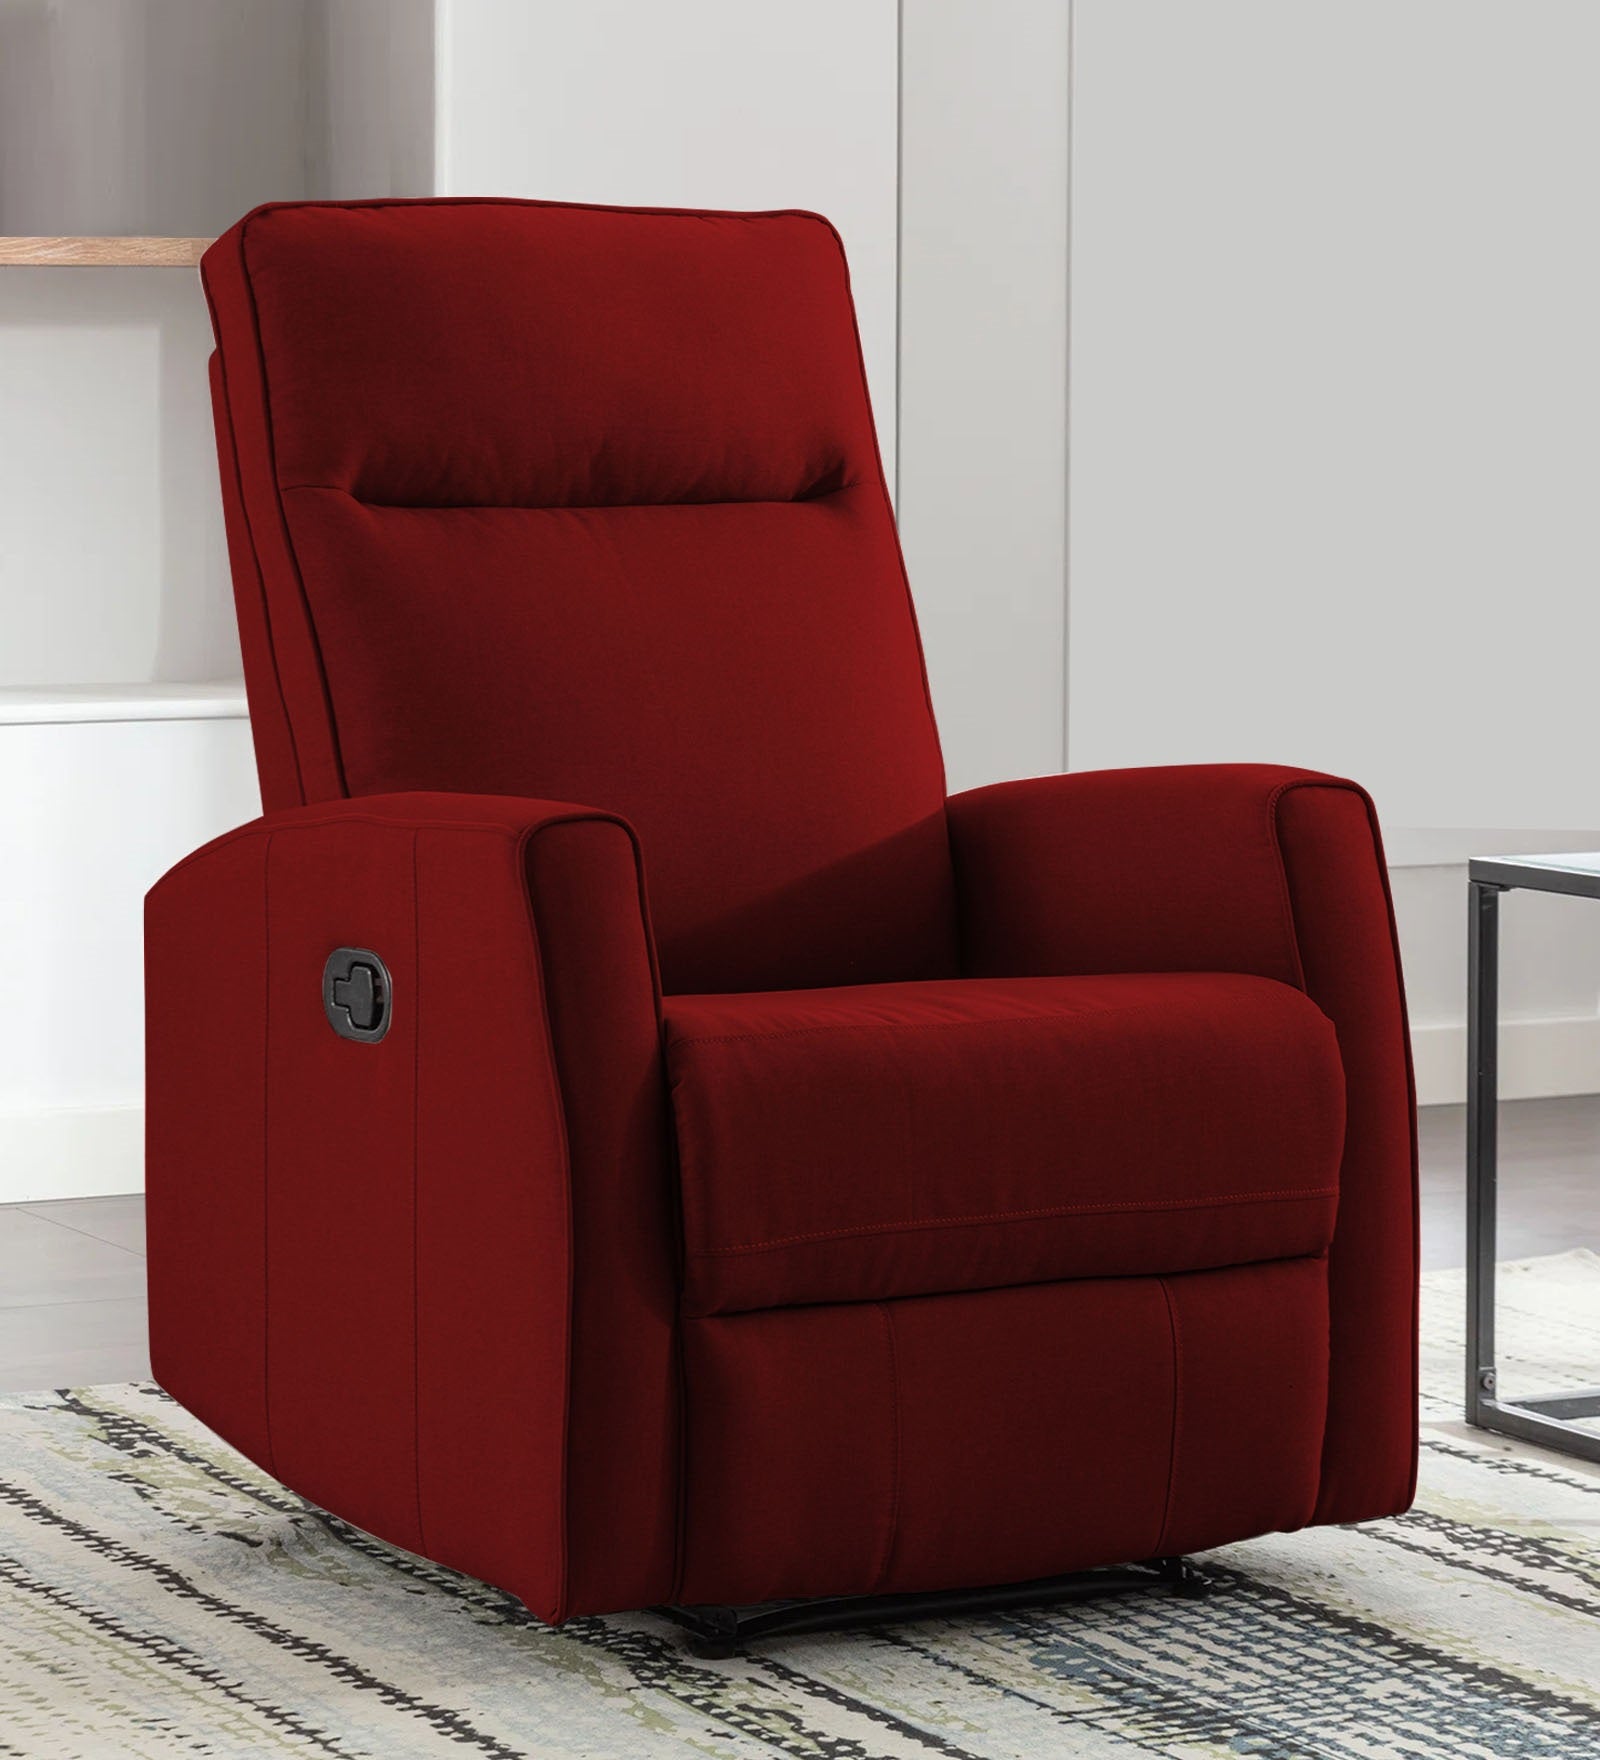 Logan Fabric Manual 1 Seater Recliner In Blood Maroon Colour